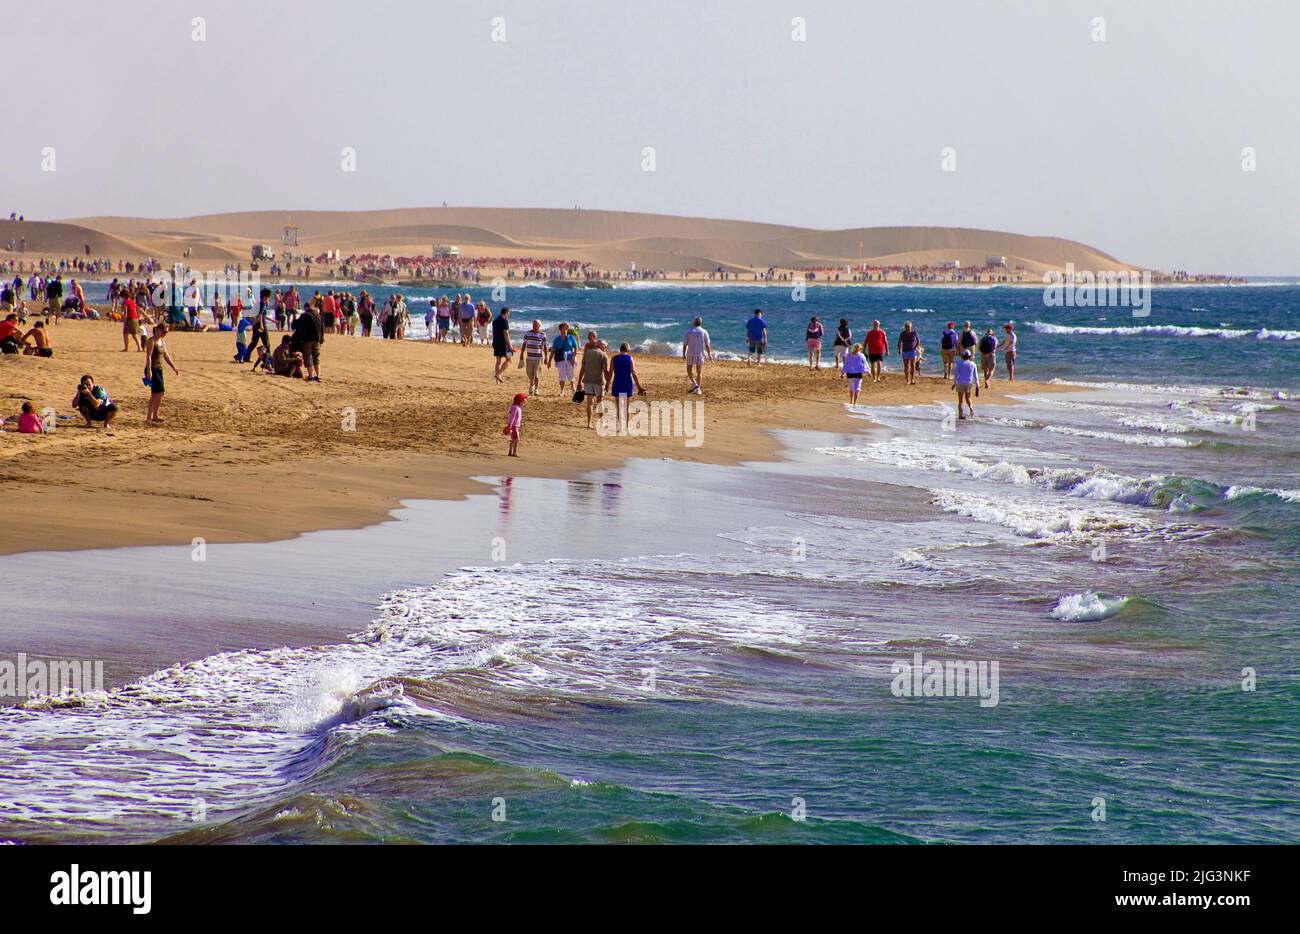 People at the beach, behind the famous dunes, Maspalomas, Grand Canary, Canary islands, Spain, Europe Stock Photo